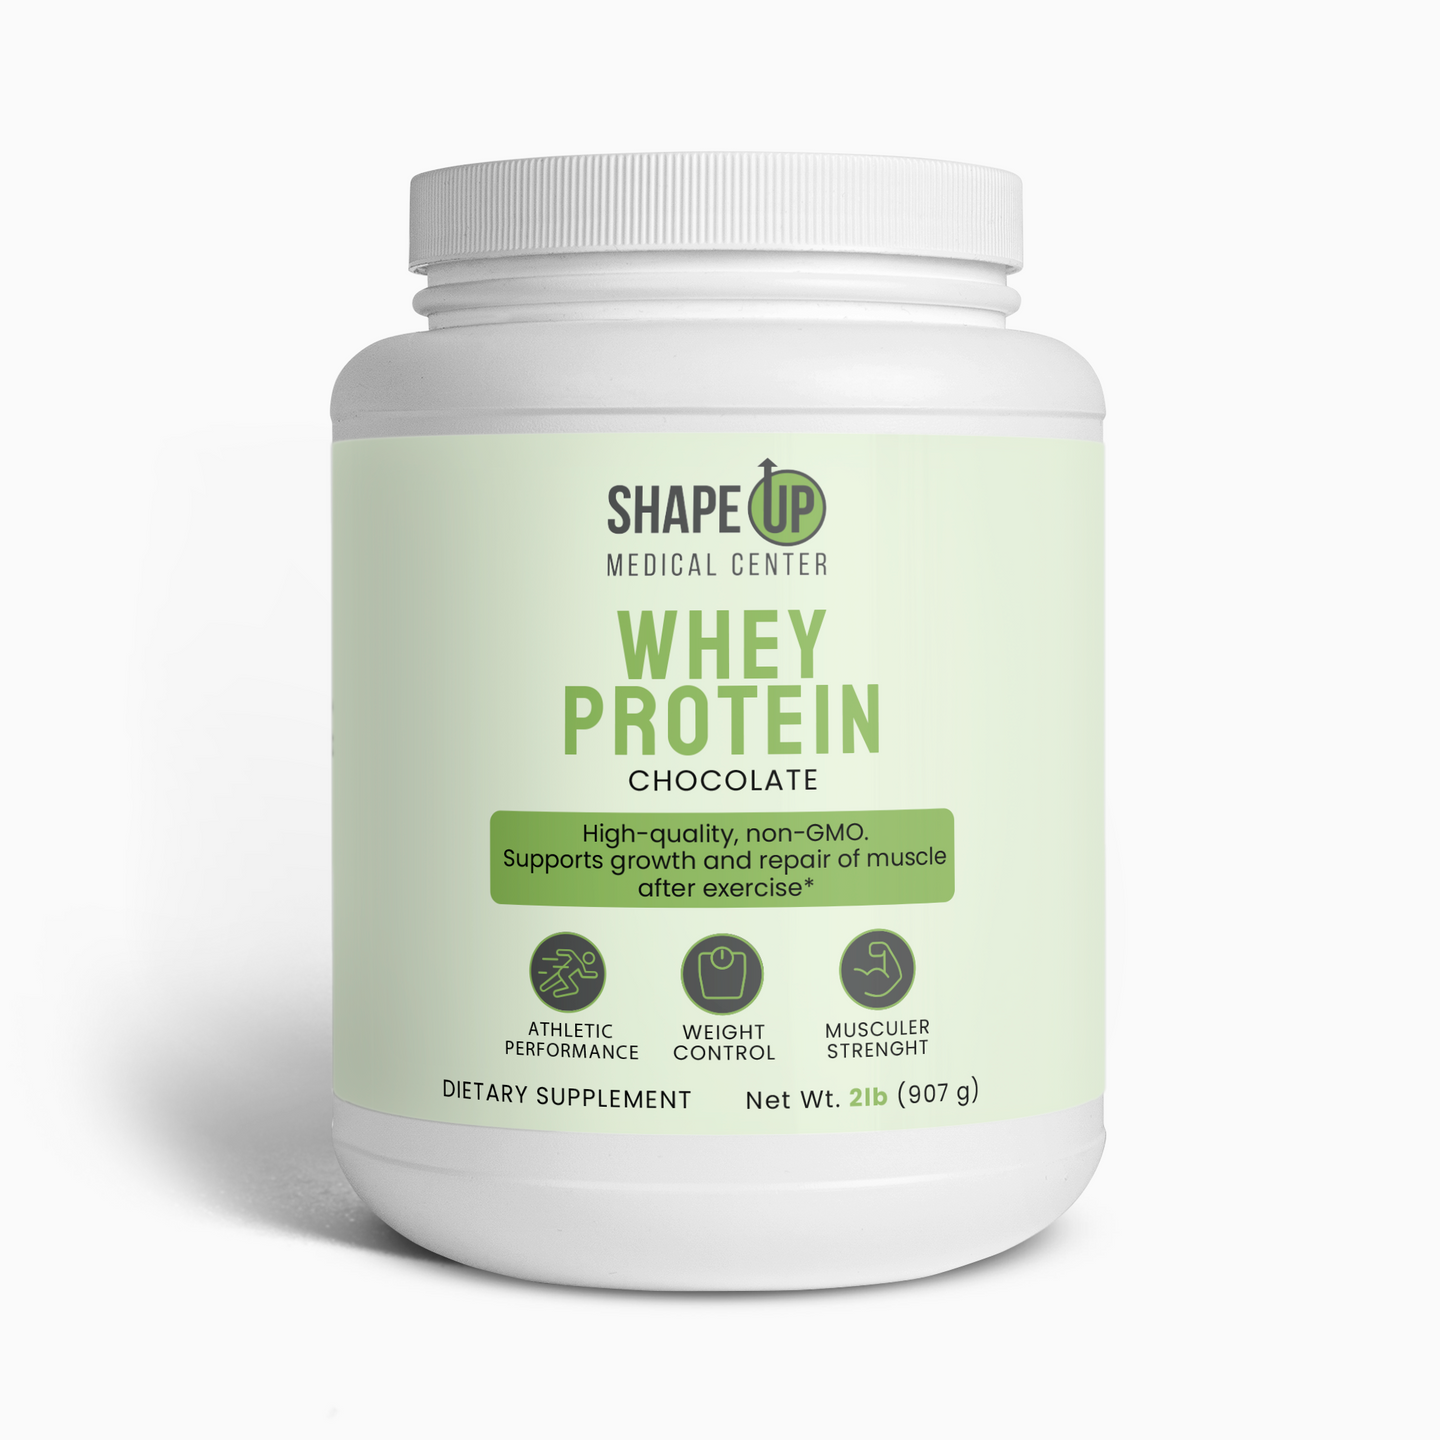 WHEY PROTEIN (CHOCOLATE FLAVOUR)